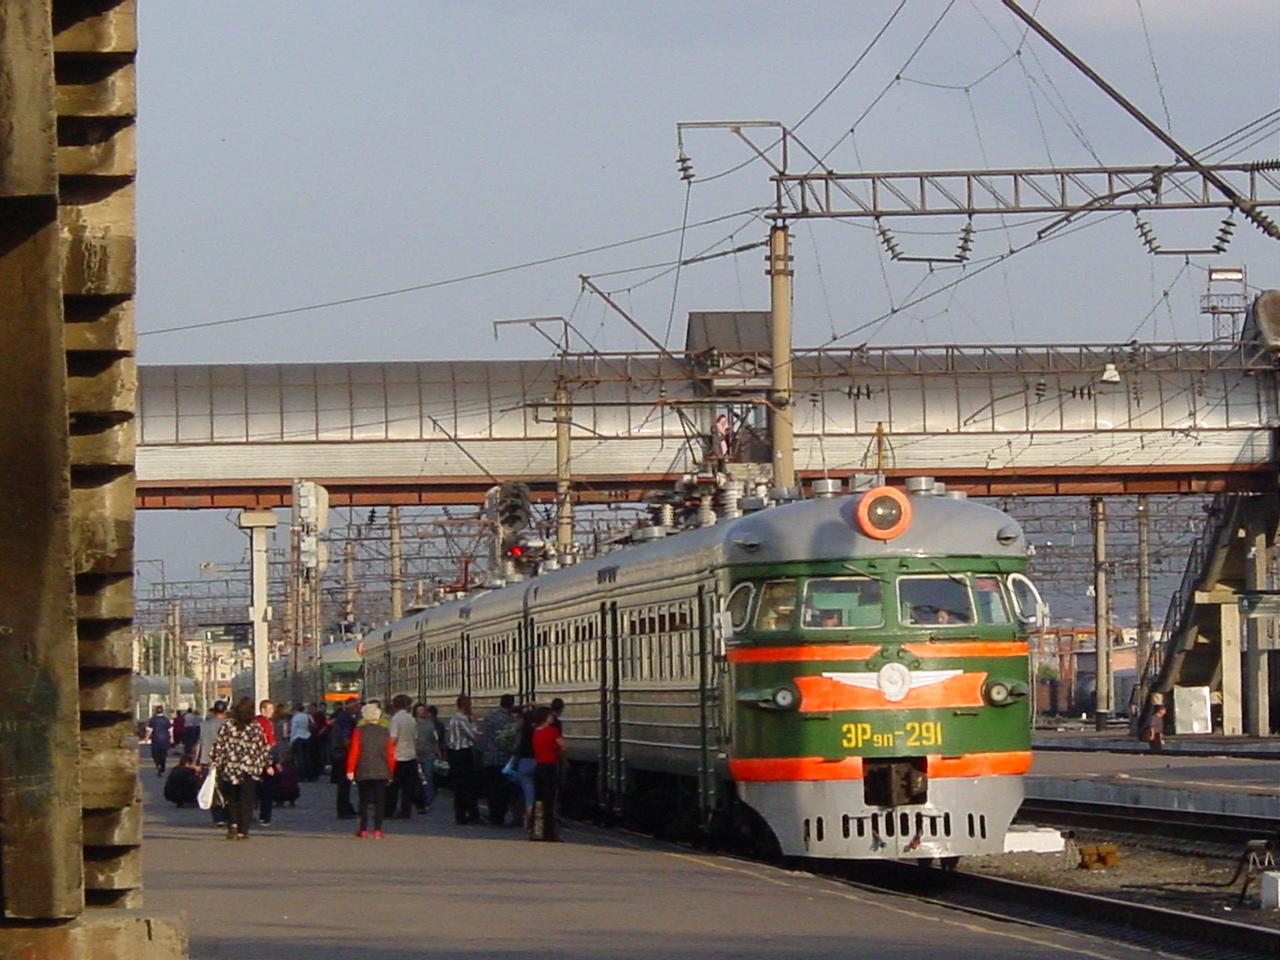 The local train at Ulan-Ude, about 100km from Lake Baikal